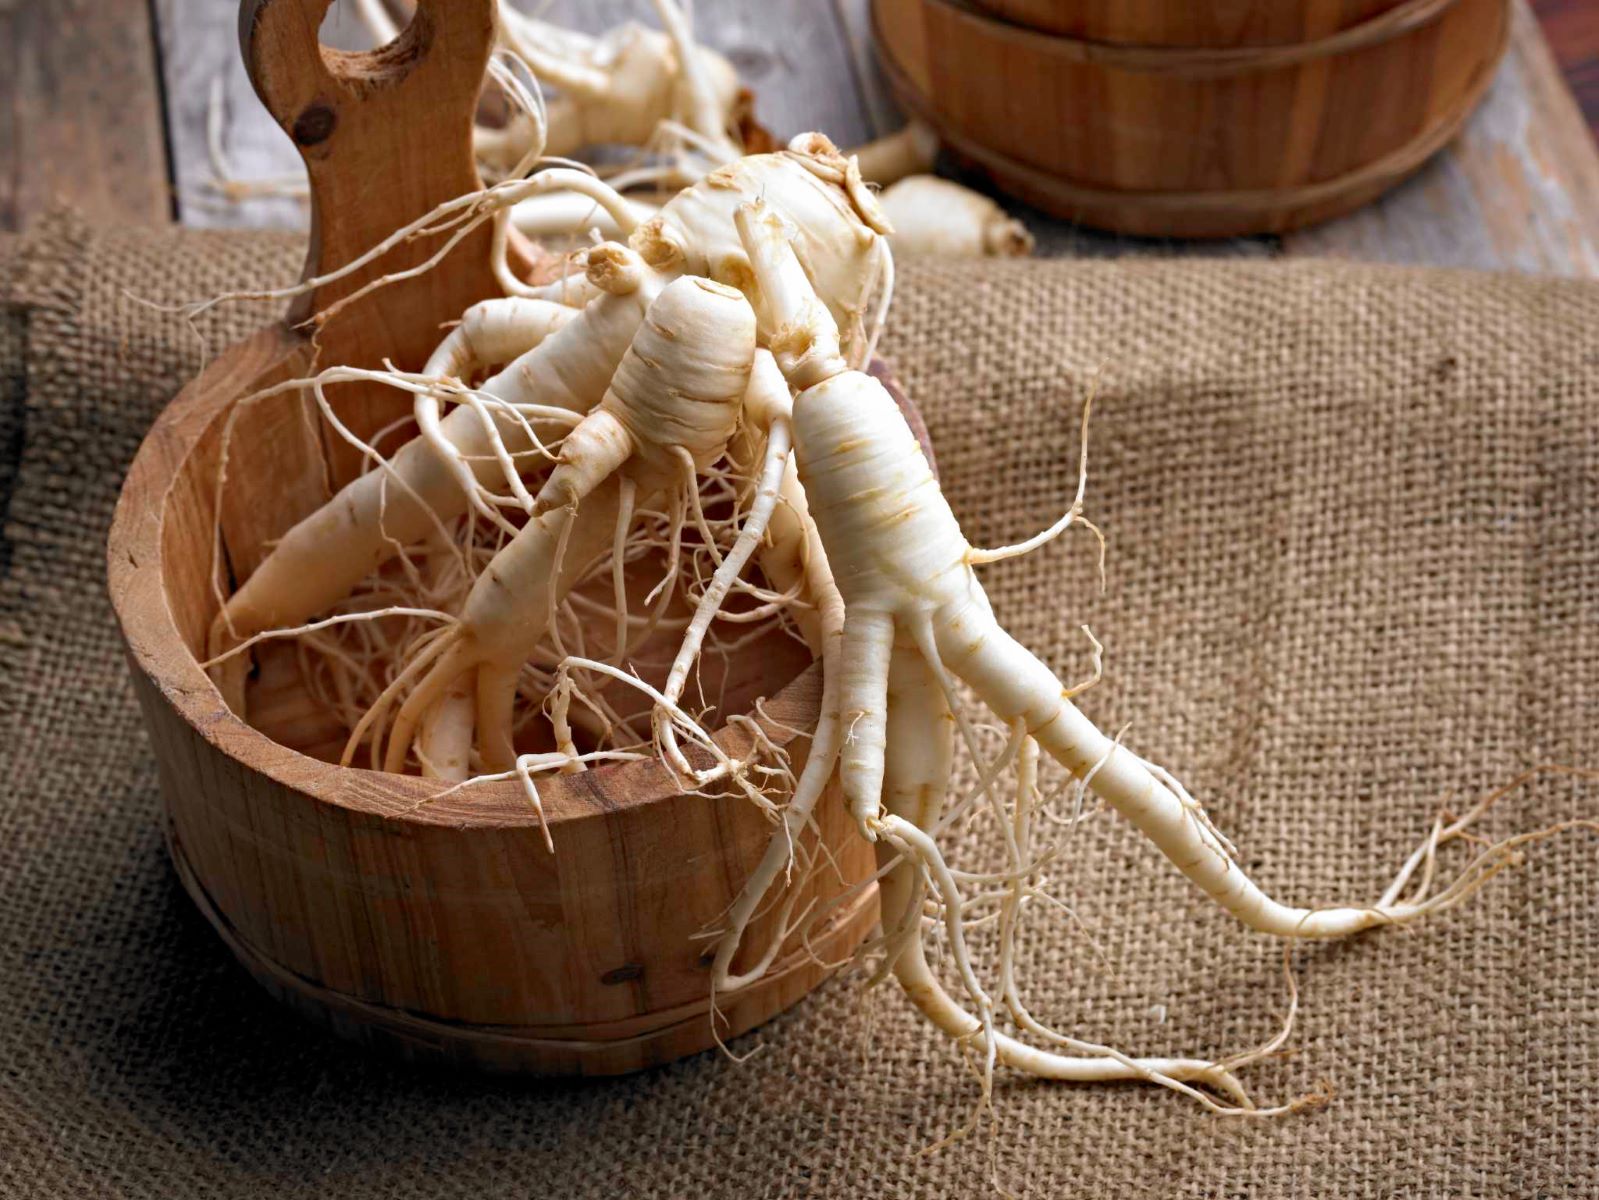 How To Store Ginseng Root